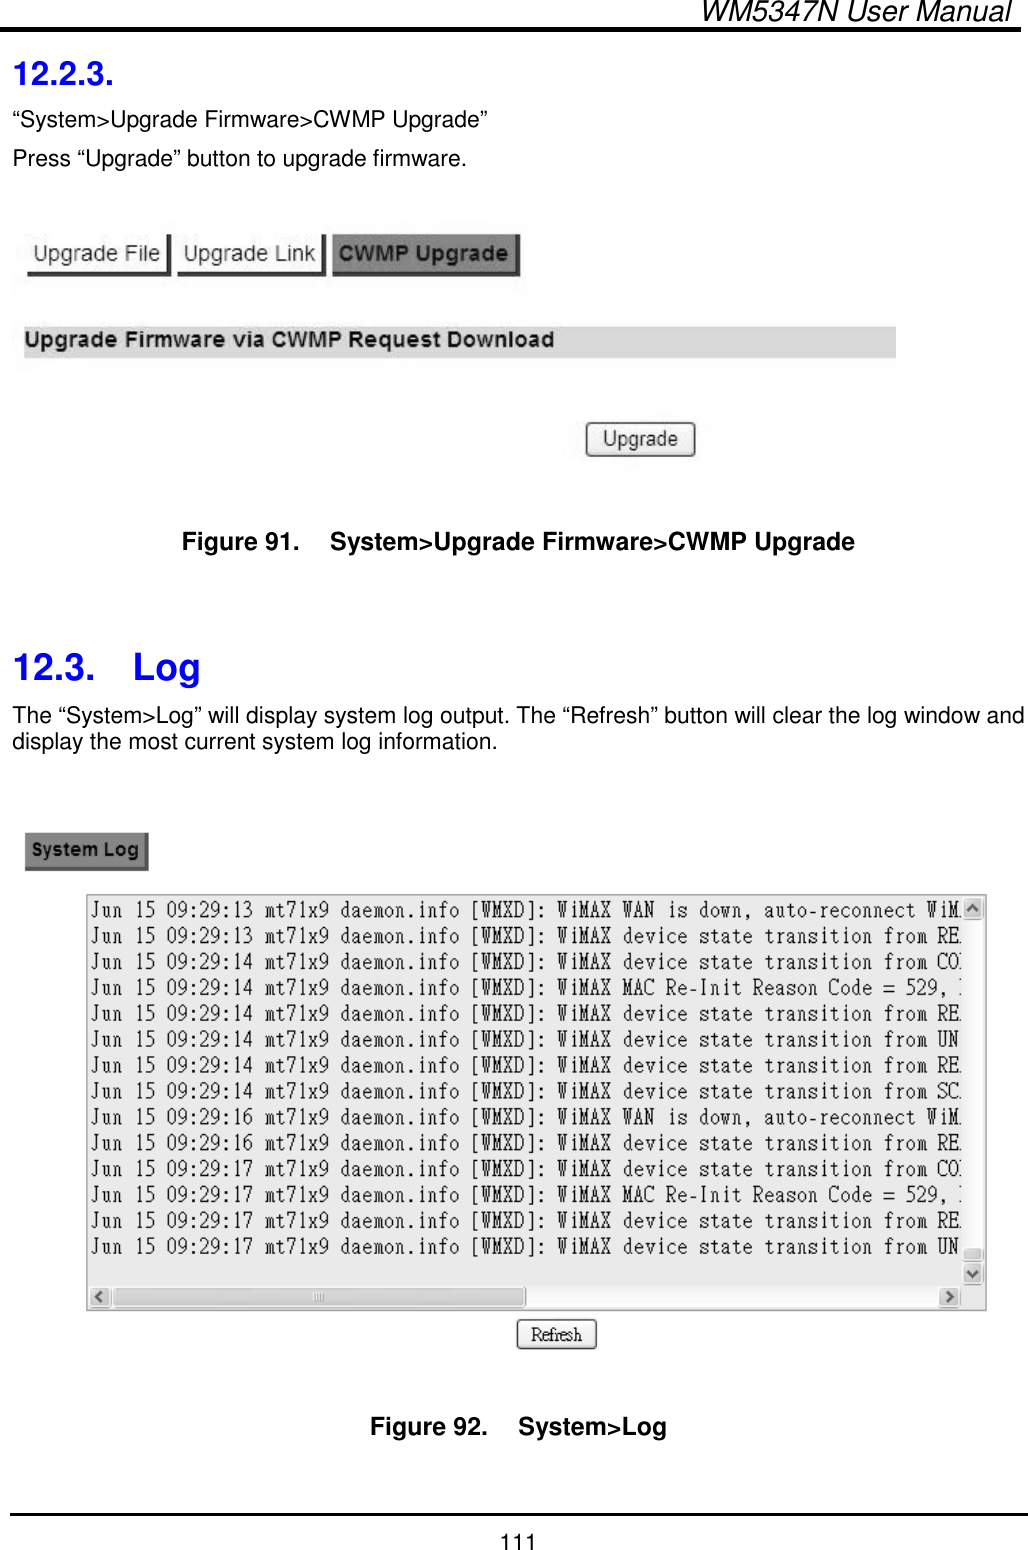  WM5347N User Manual  111 12.2.3.   “System&gt;Upgrade Firmware&gt;CWMP Upgrade” Press “Upgrade” button to upgrade firmware.   Figure 91.   System&gt;Upgrade Firmware&gt;CWMP Upgrade   12.3.  Log The “System&gt;Log” will display system log output. The “Refresh” button will clear the log window and display the most current system log information.   Figure 92.   System&gt;Log  